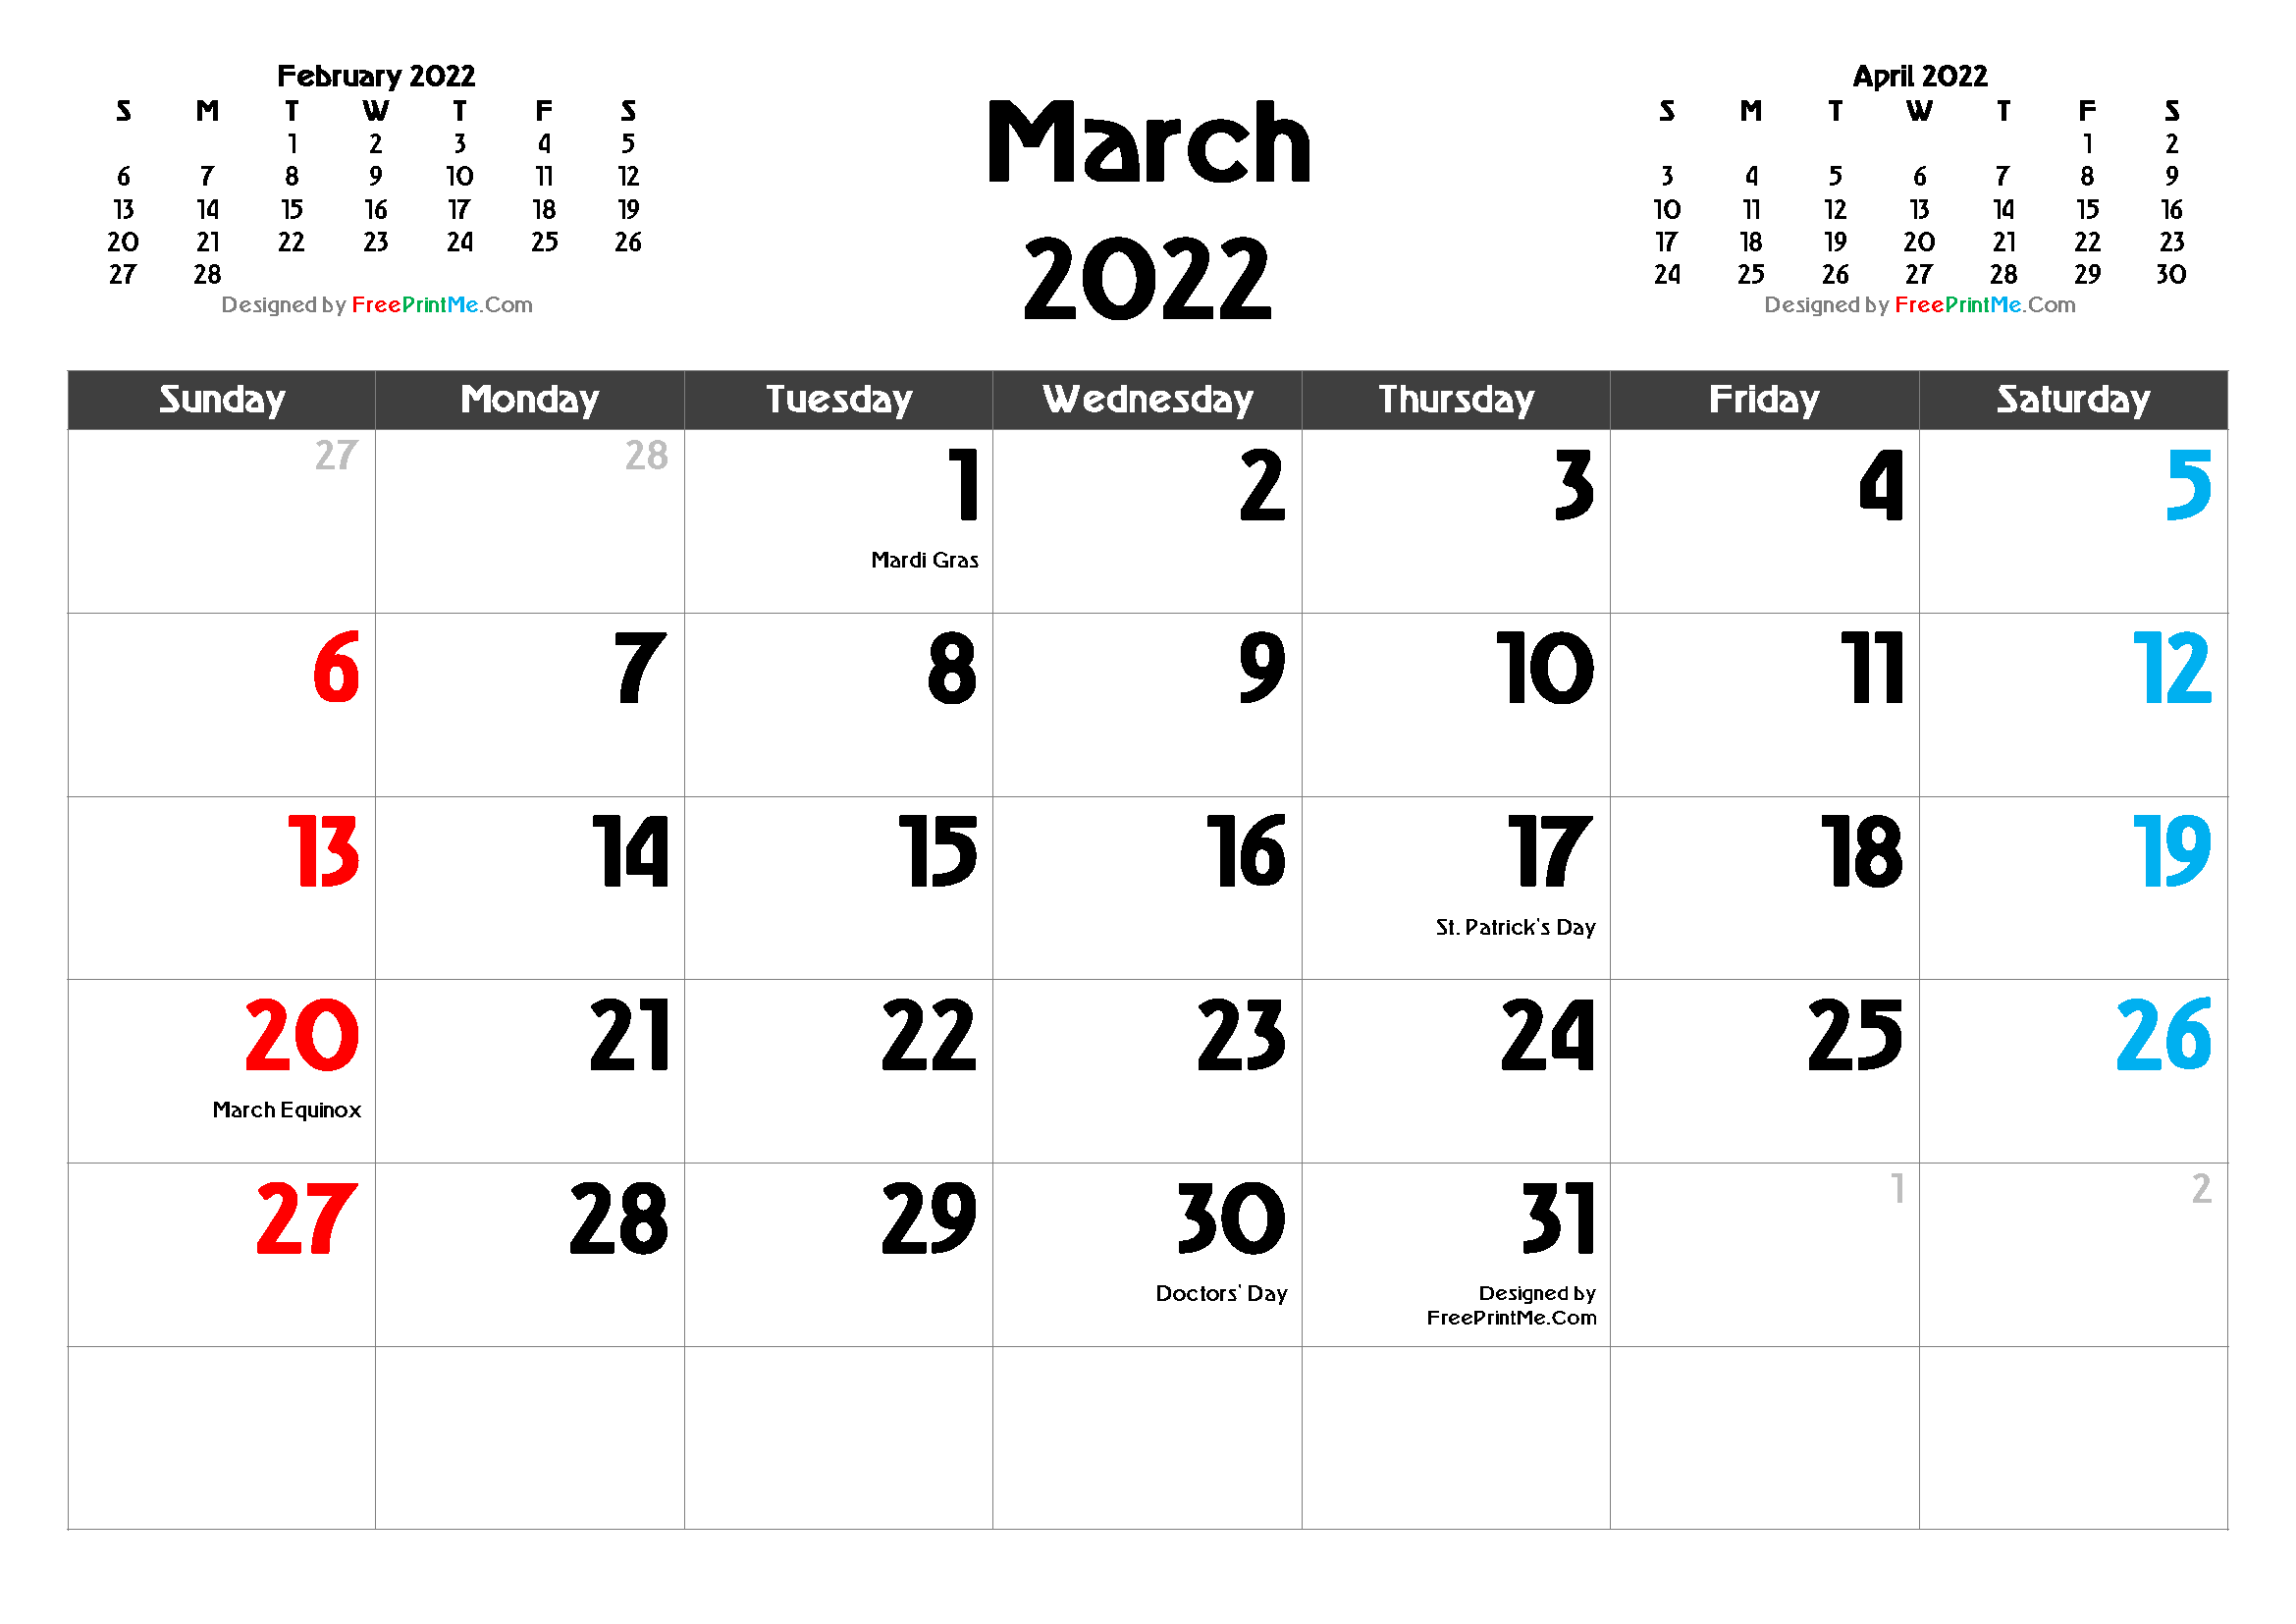 Free Download Monthly Calendar 2022 Free Printable March 2022 Calendar Pdf And Image